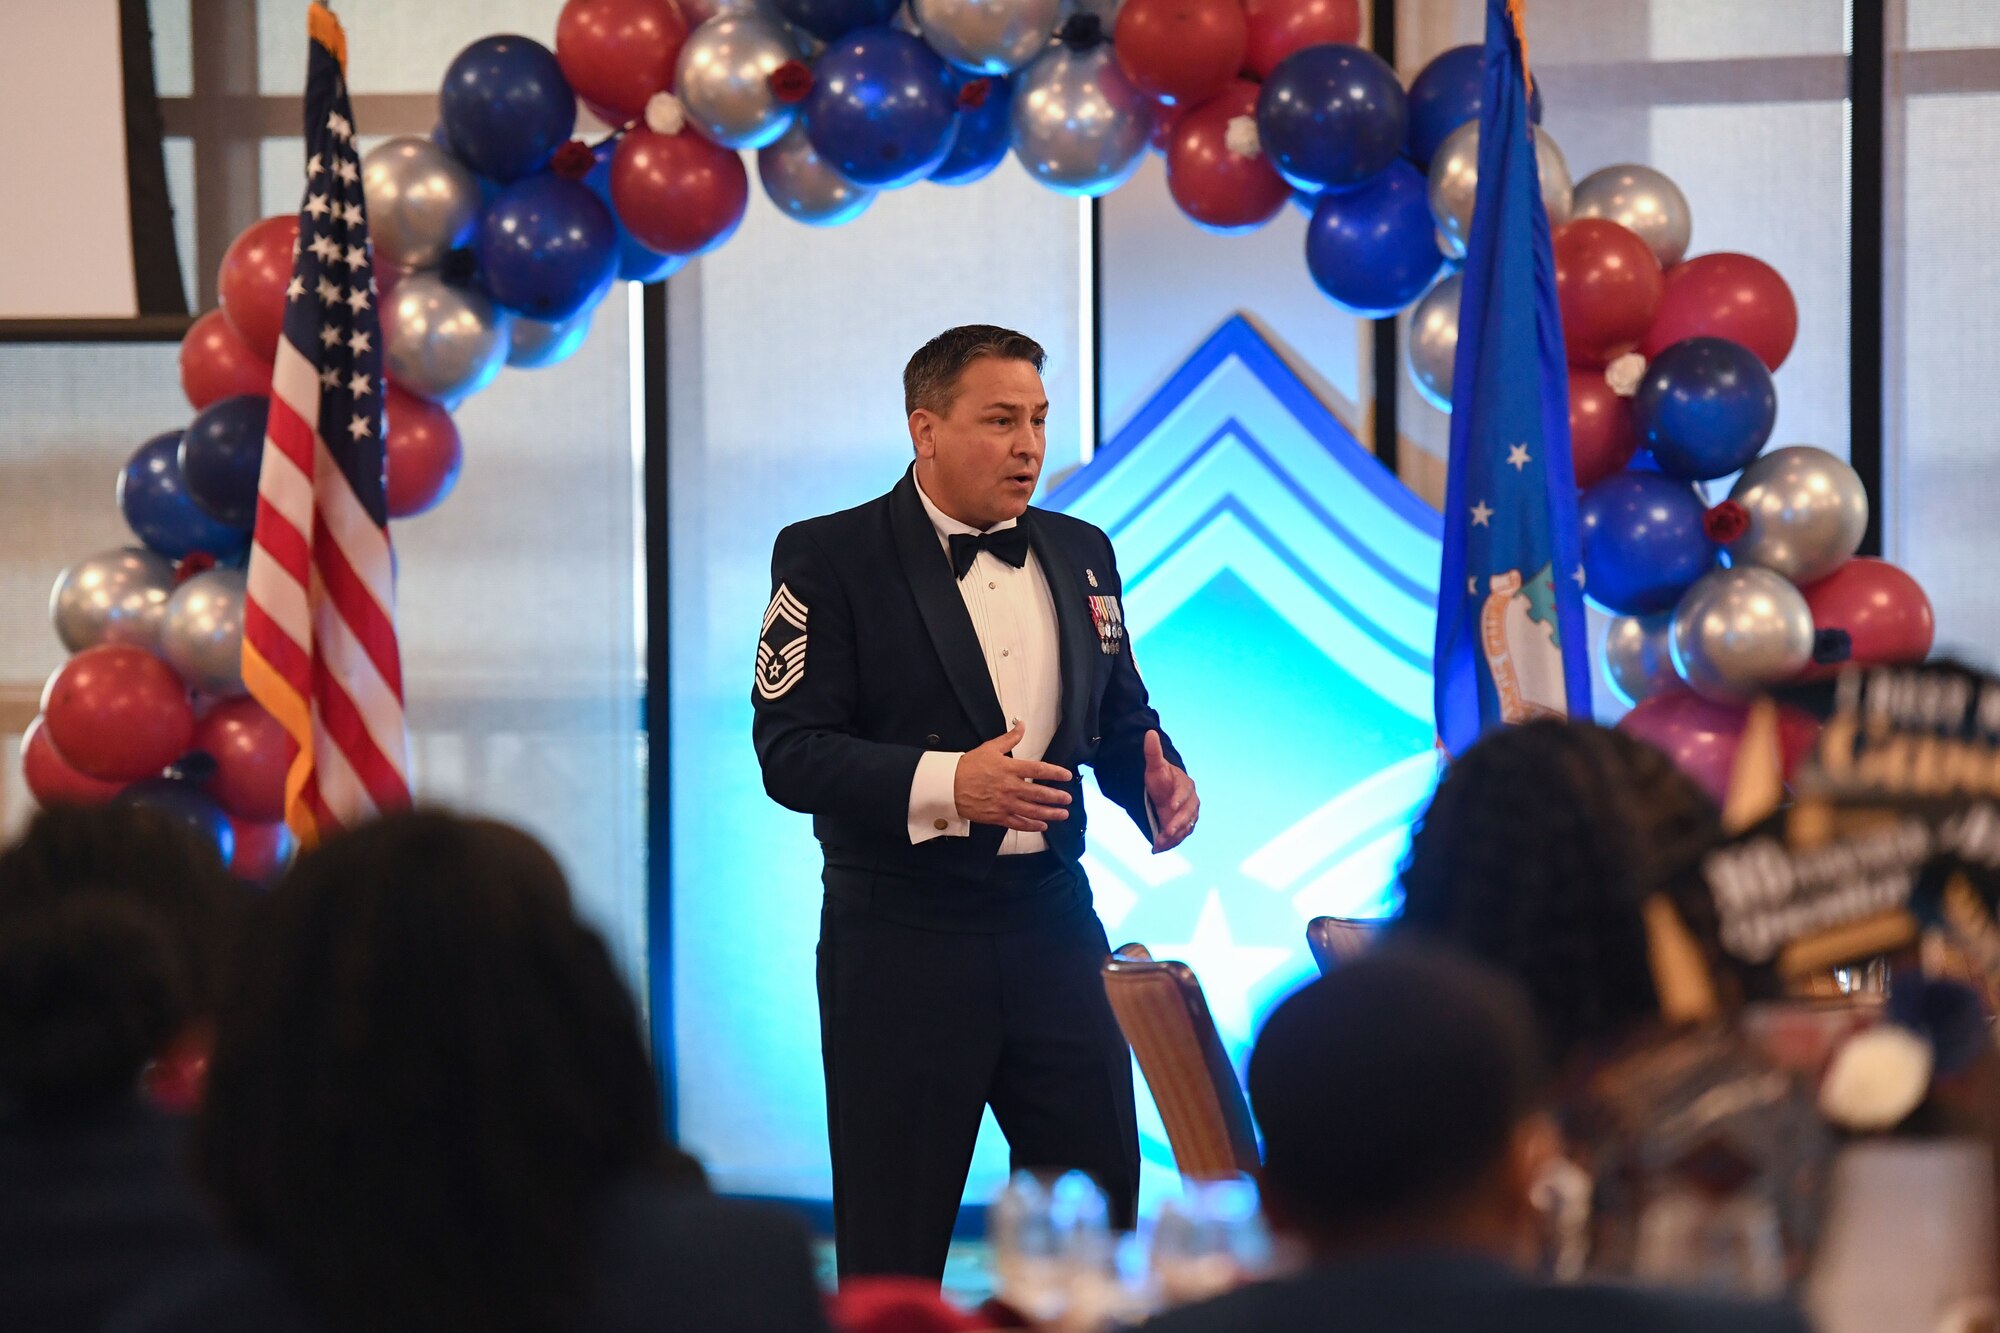 U.S. Air Force Retired Chief Master Sgt. Chad Balance delivers remarks during the Chief Master Sergeant Recognition Ceremony inside the Bay Breeze Event Center at Keesler Air Force Base, Mississippi, April 20, 2023.